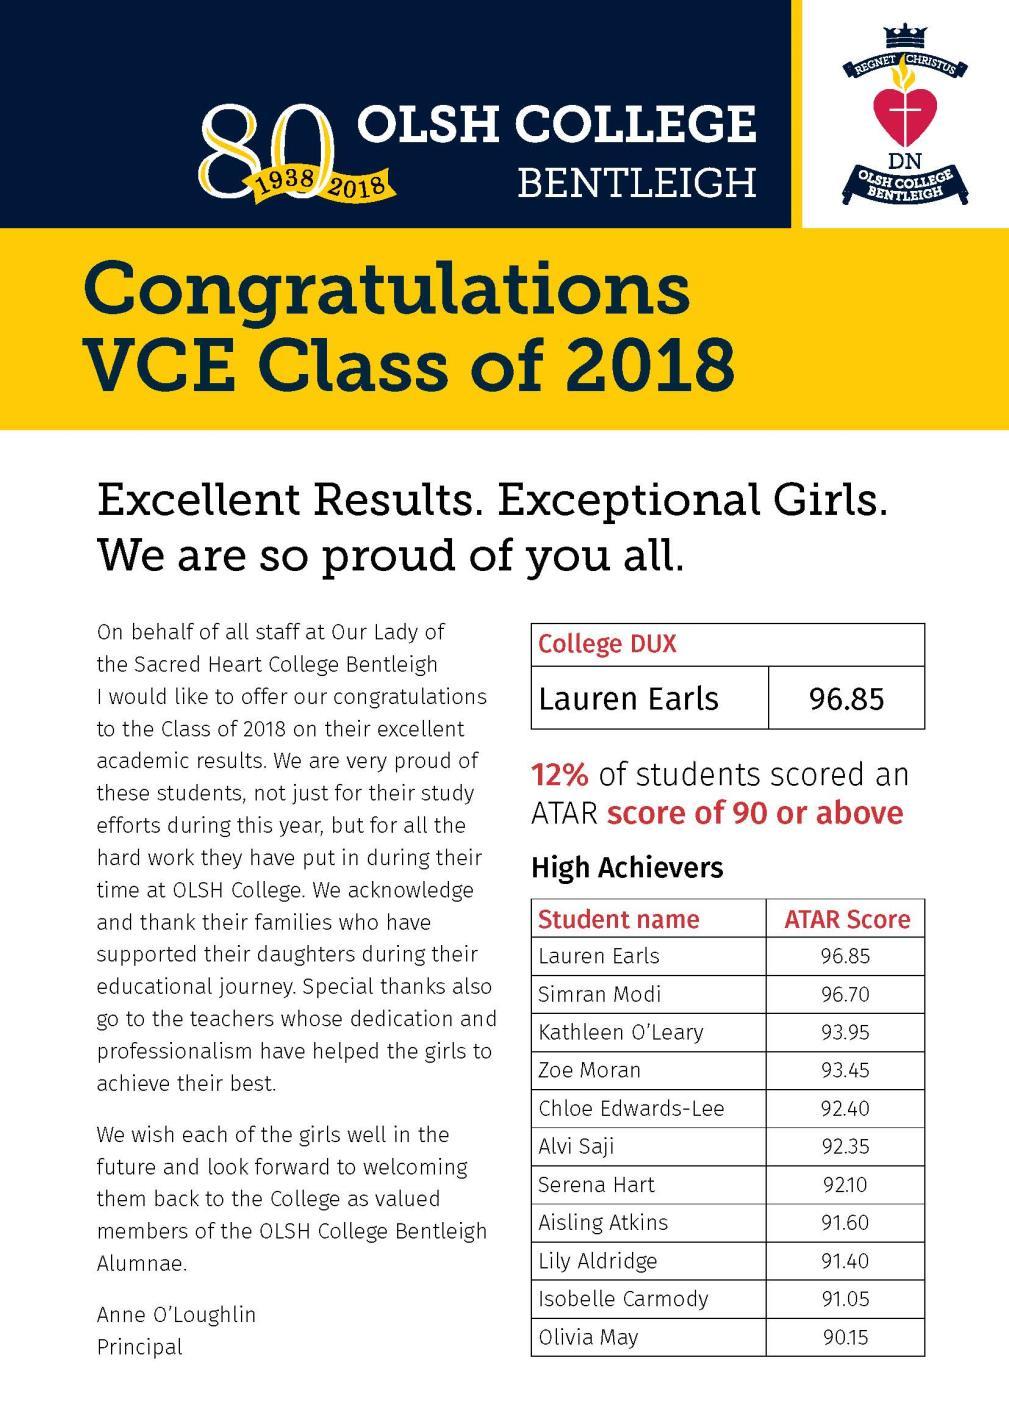 2 Class of 2018 Success Congratulations to the OLSH College Bentleigh Class of 2018 on their excellent VCE results. We celebrate the College DUX, Lauren Earls, who achieved an ATAR score of 96.85.